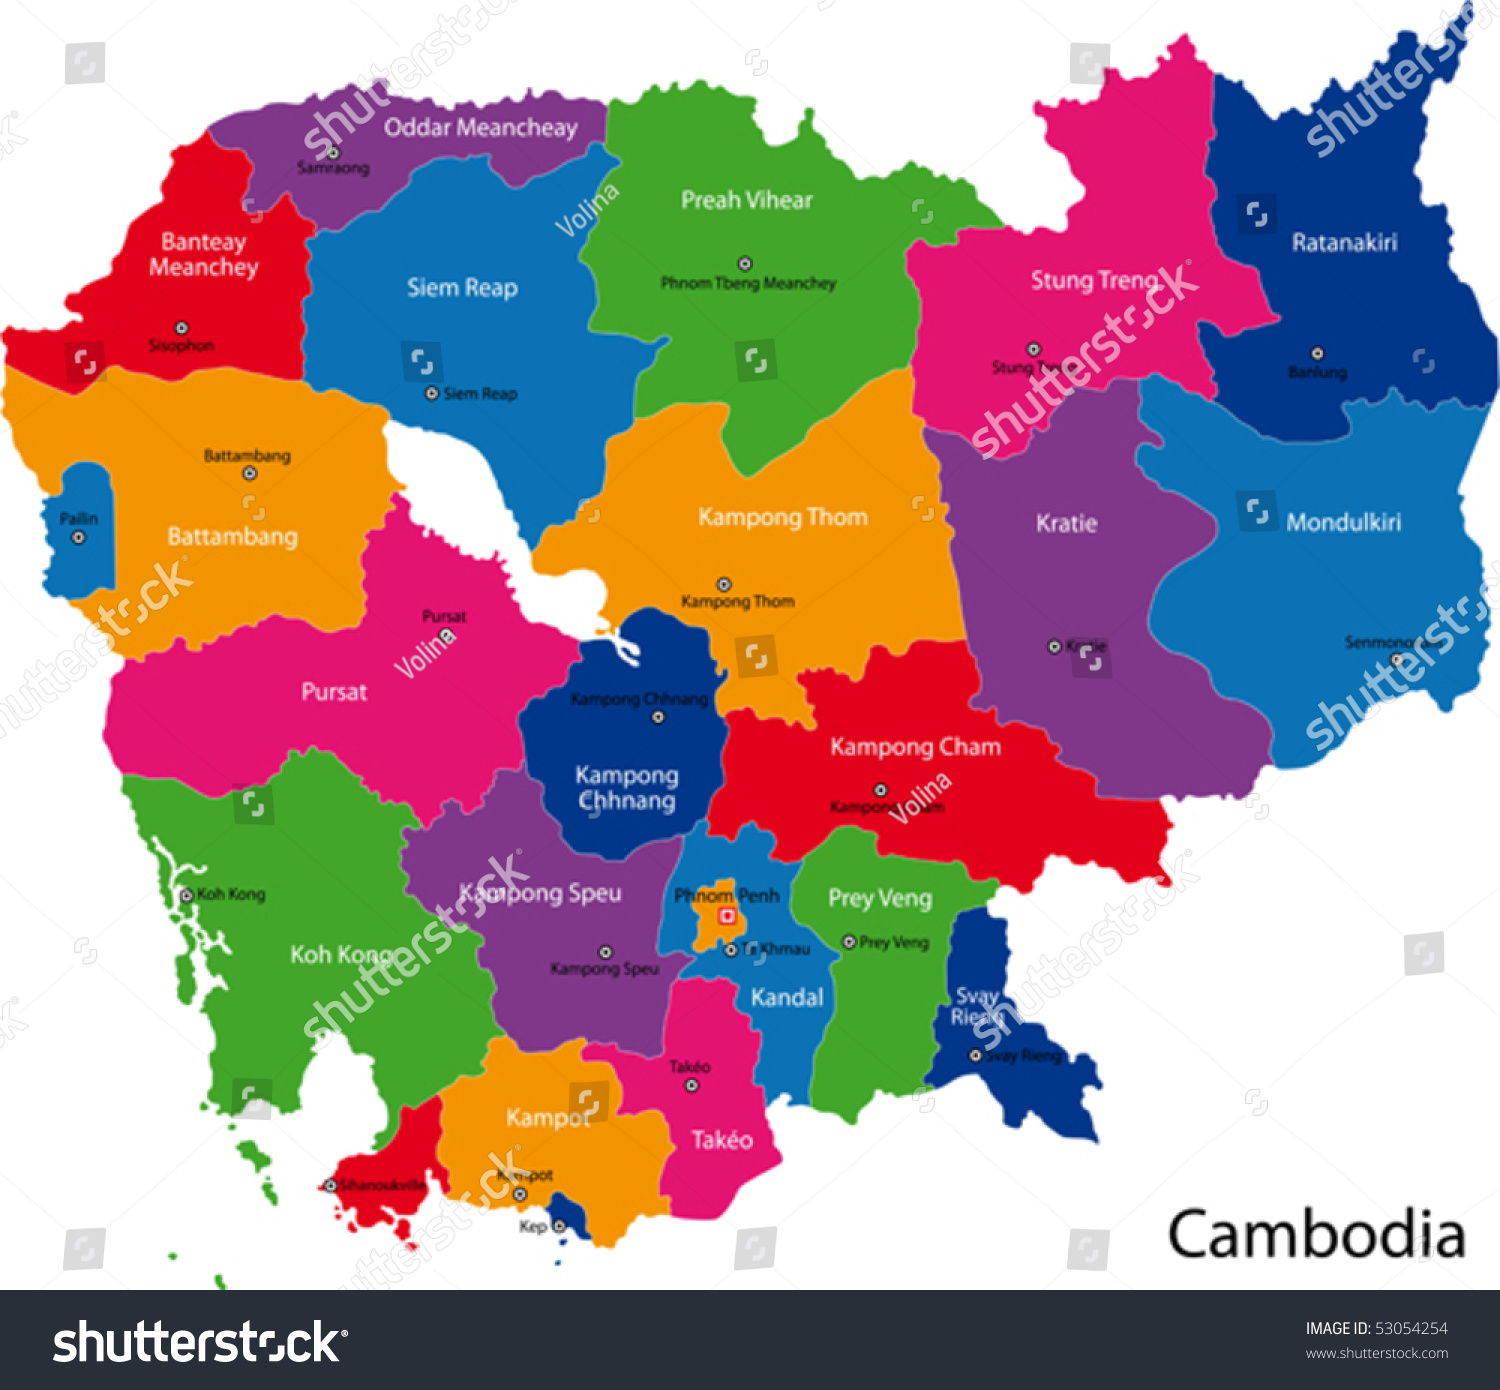 clipart map of cambodia - photo #31